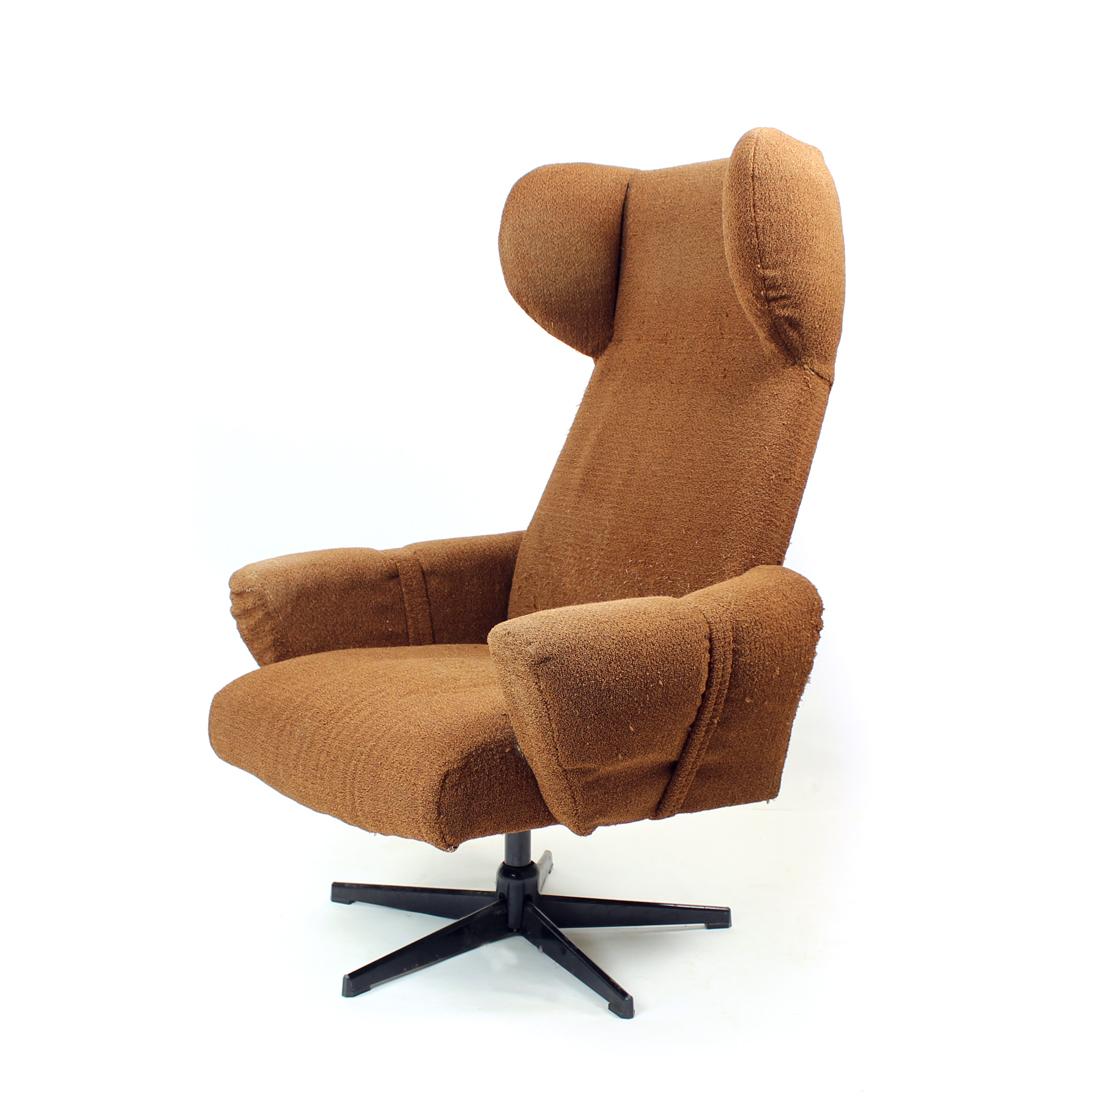 Mid-Century Modern Midcentury Wing Swivel Chair in Brown Fabric, Czechoslovakia, 1960s For Sale